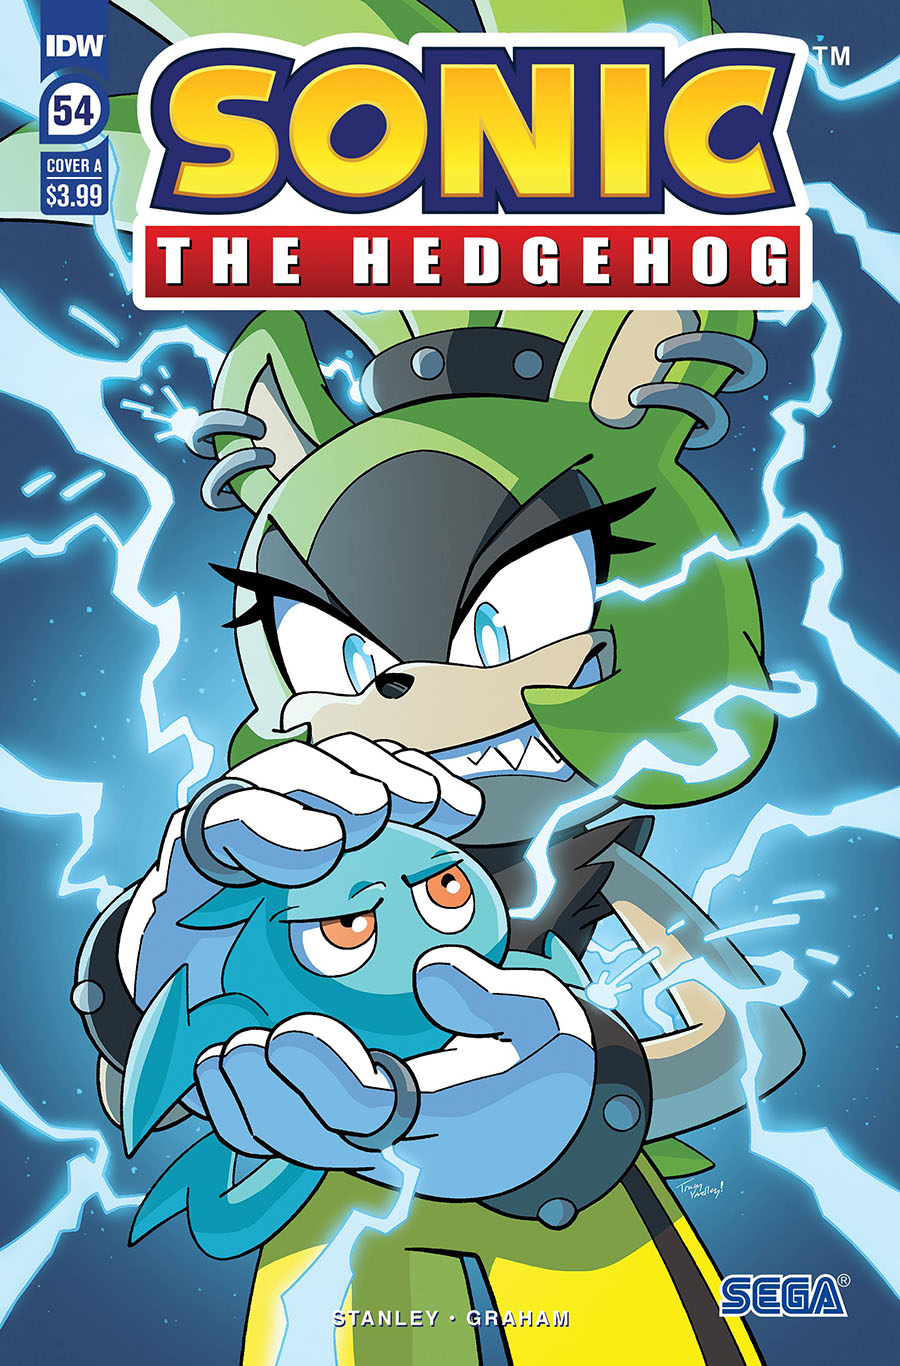 Sonic The Hedgehog Vol 3 #54 Cover A Regular Tracy Yardley Cover